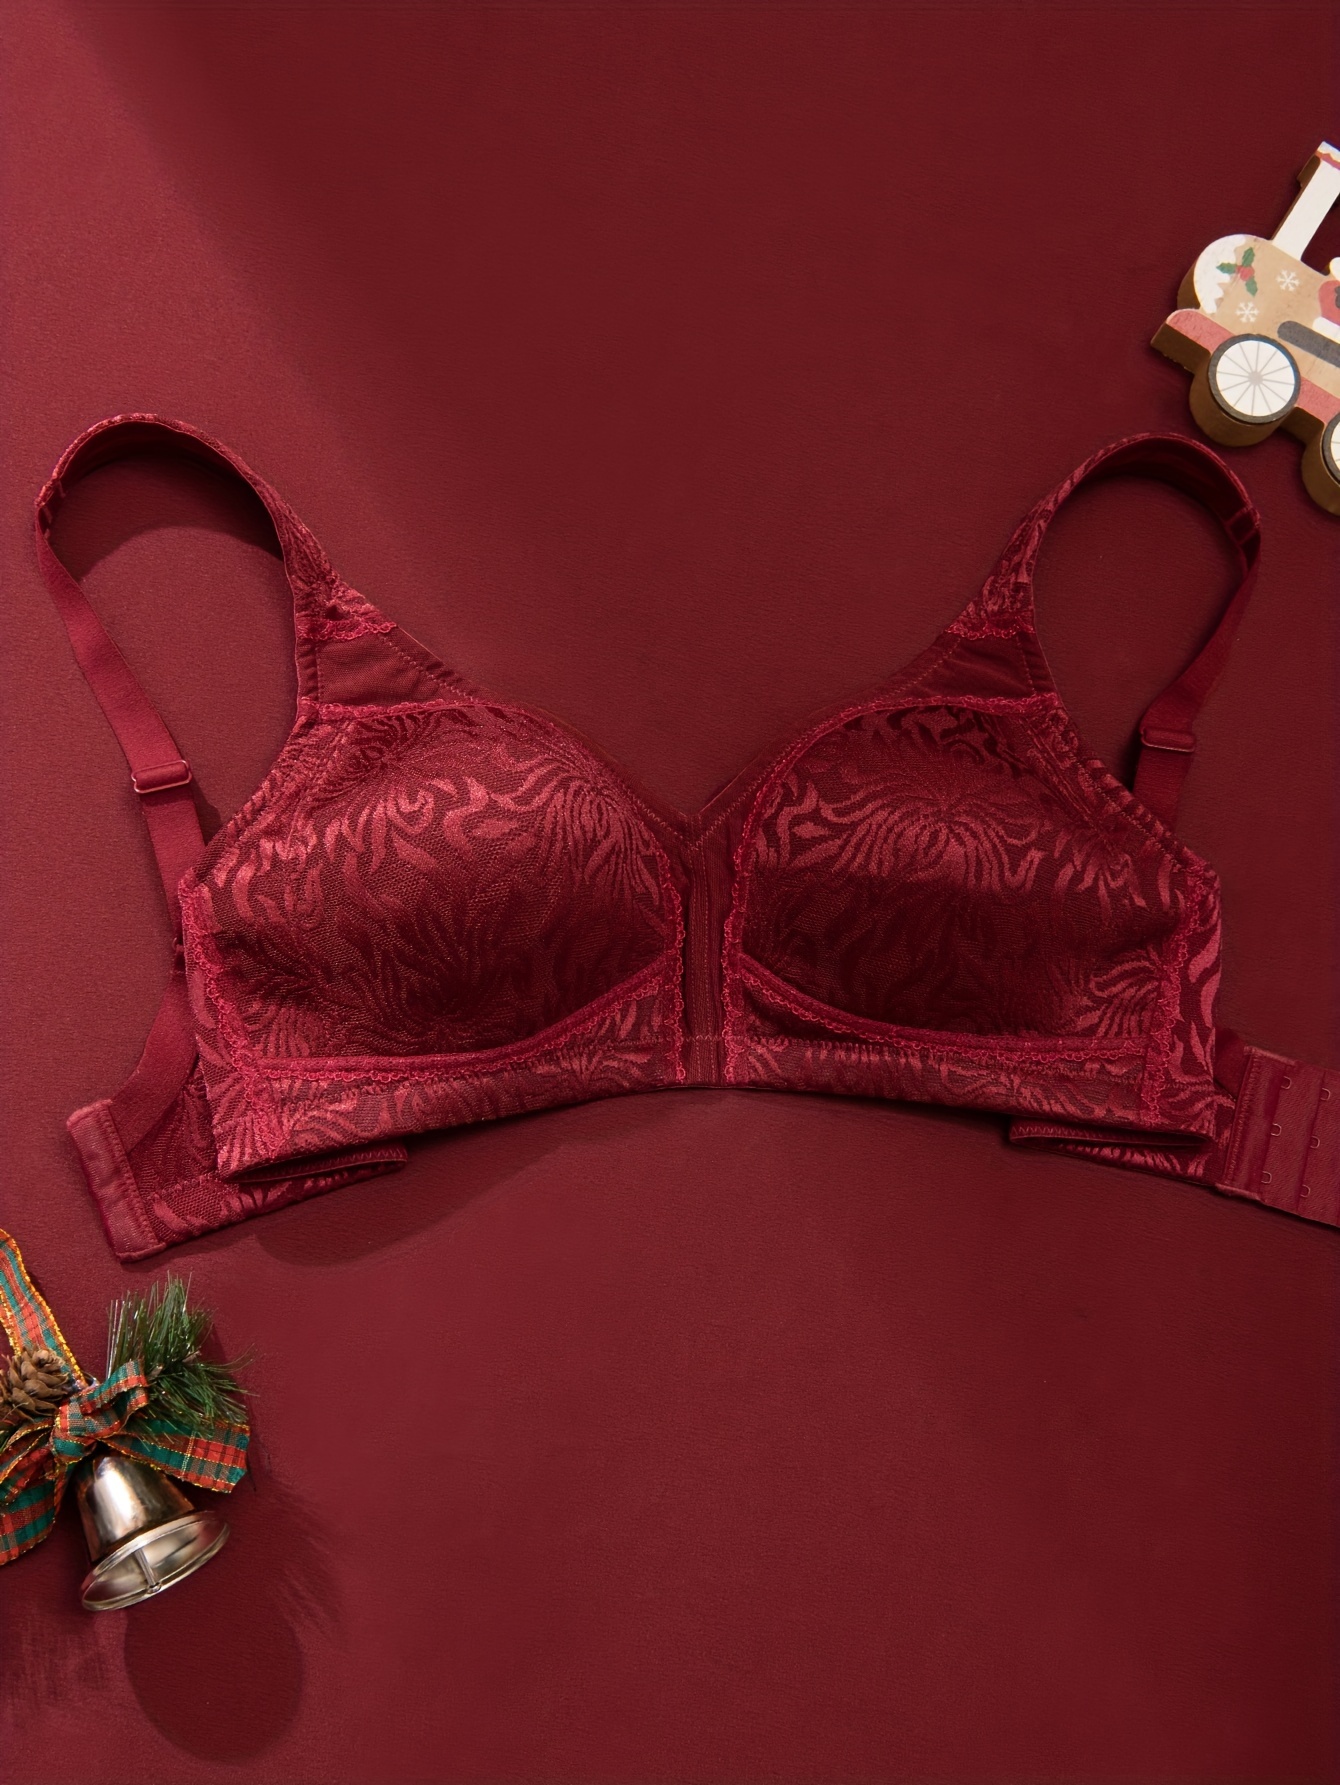 ❤︎ Wide Side bras perform 𝐦𝐢𝐧𝐢-𝐦𝐢𝐫𝐚𝐜𝐥𝐞𝐬 🔮 for slimming and  shaping needs. Wide Side Belt Lace